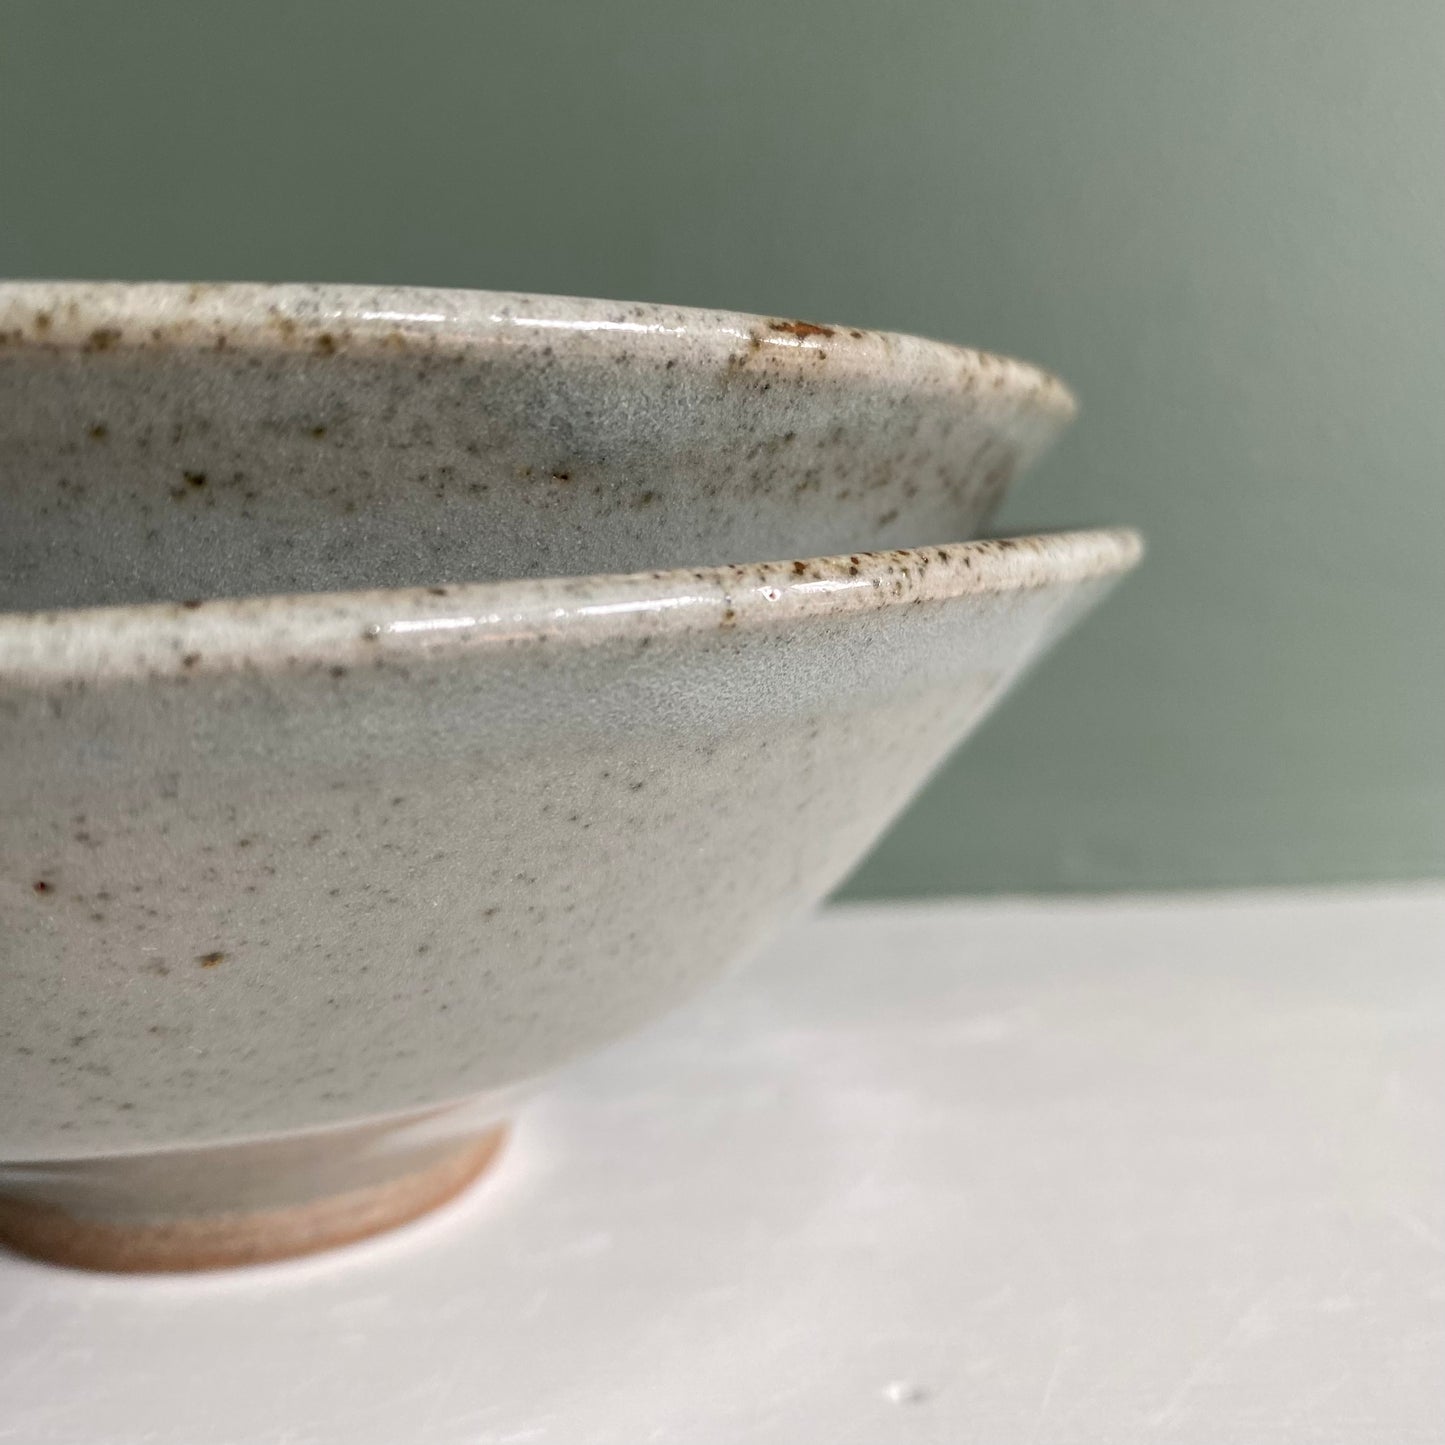 Mid Century Inspired Ceramic Stoneware small bowl with flower design, reduction gas fired